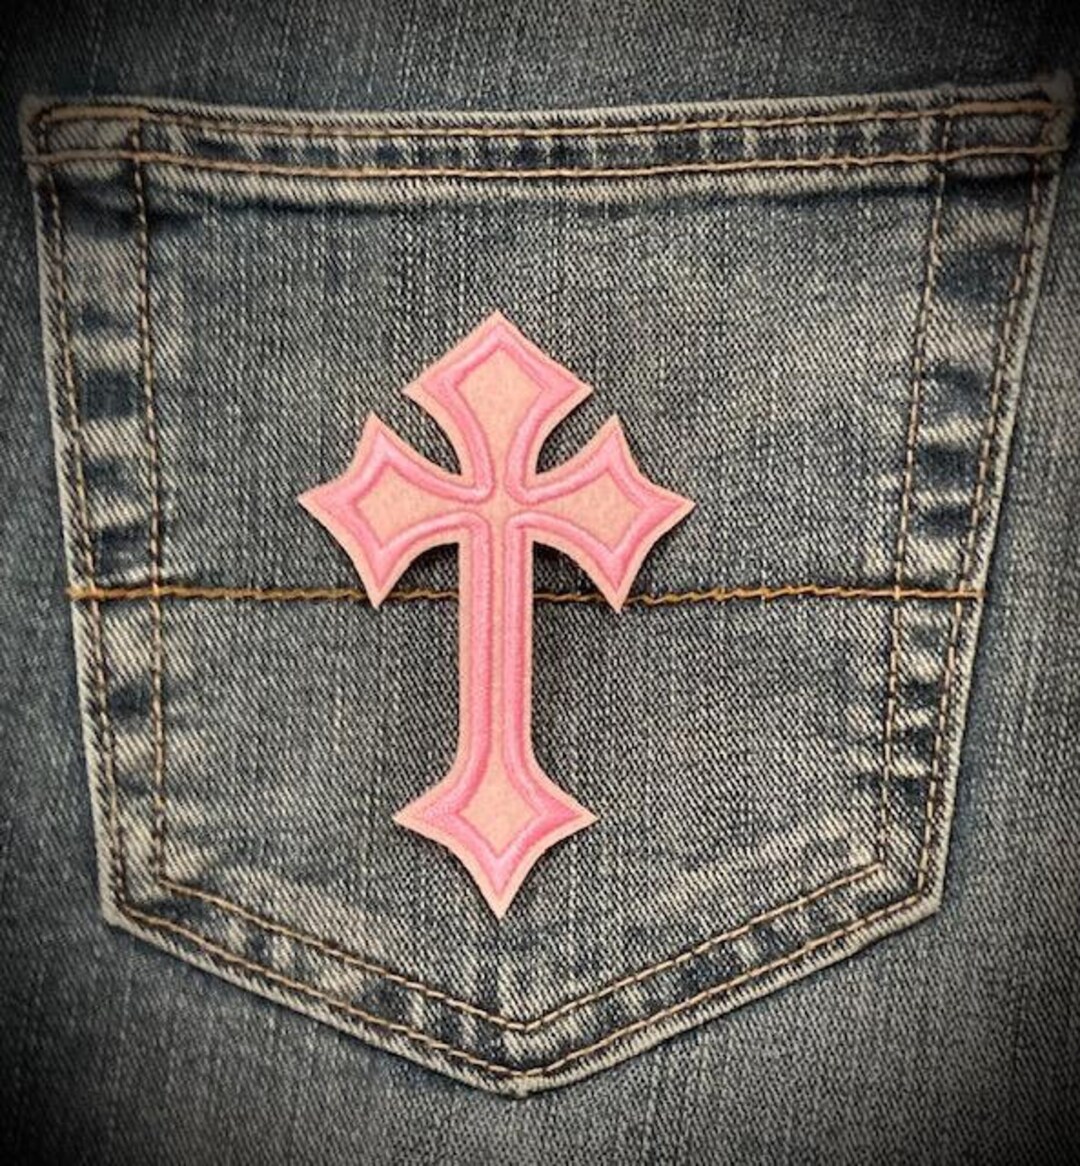 Cross Patches Iron on Cross Embroidery Applique Patch, DIY Decor Patches for Clothing Jeans Jackets Backpacks Hats Shirts (8 Pieces 8 Color)